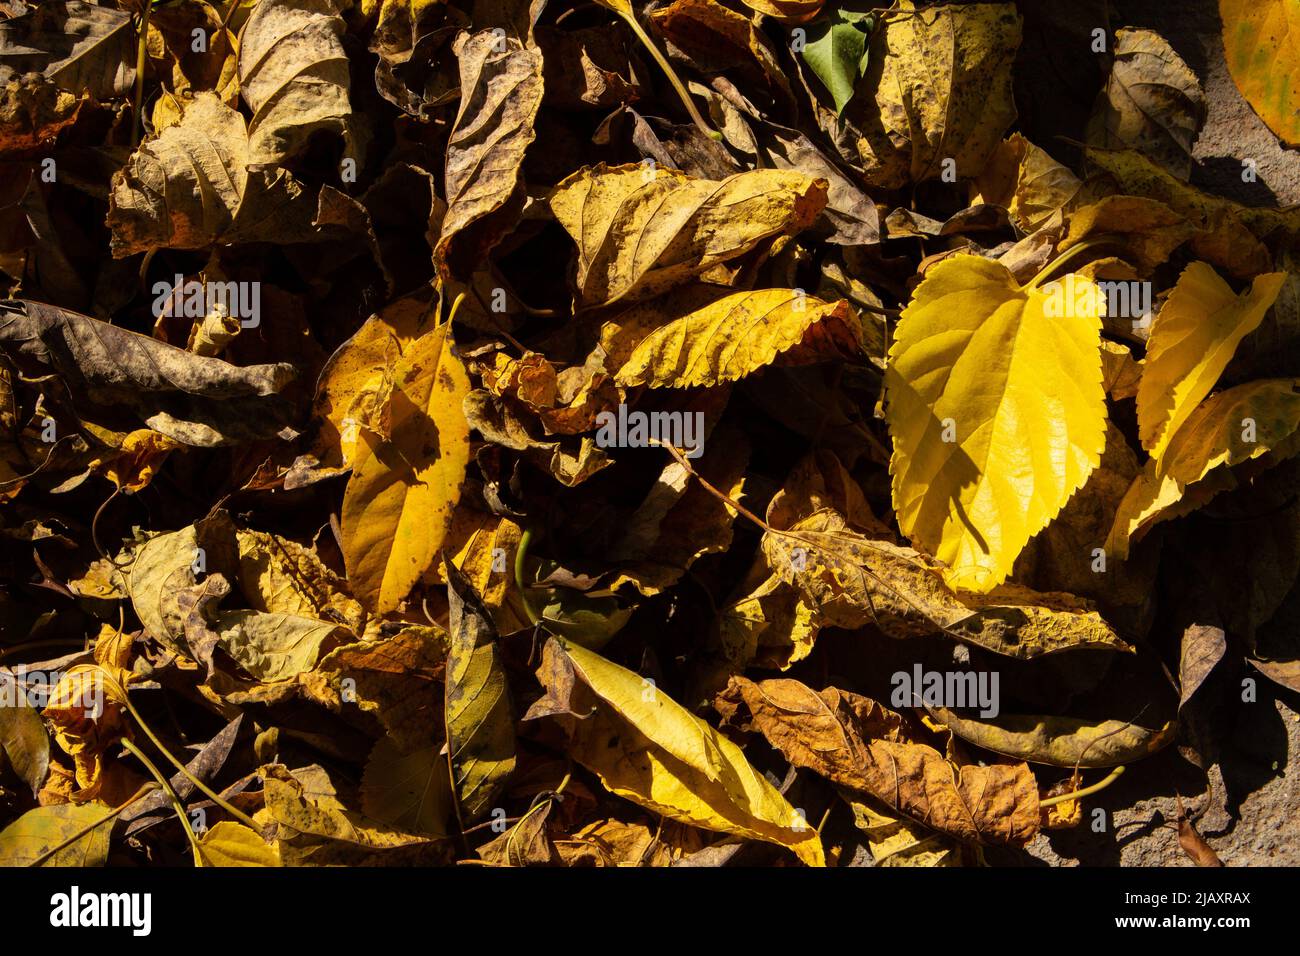 Goiânia, Goias, Brazil – June 01, 2022: Texture of a bunch of dry, yellowed leaves covering the ground in the yard. Stock Photo